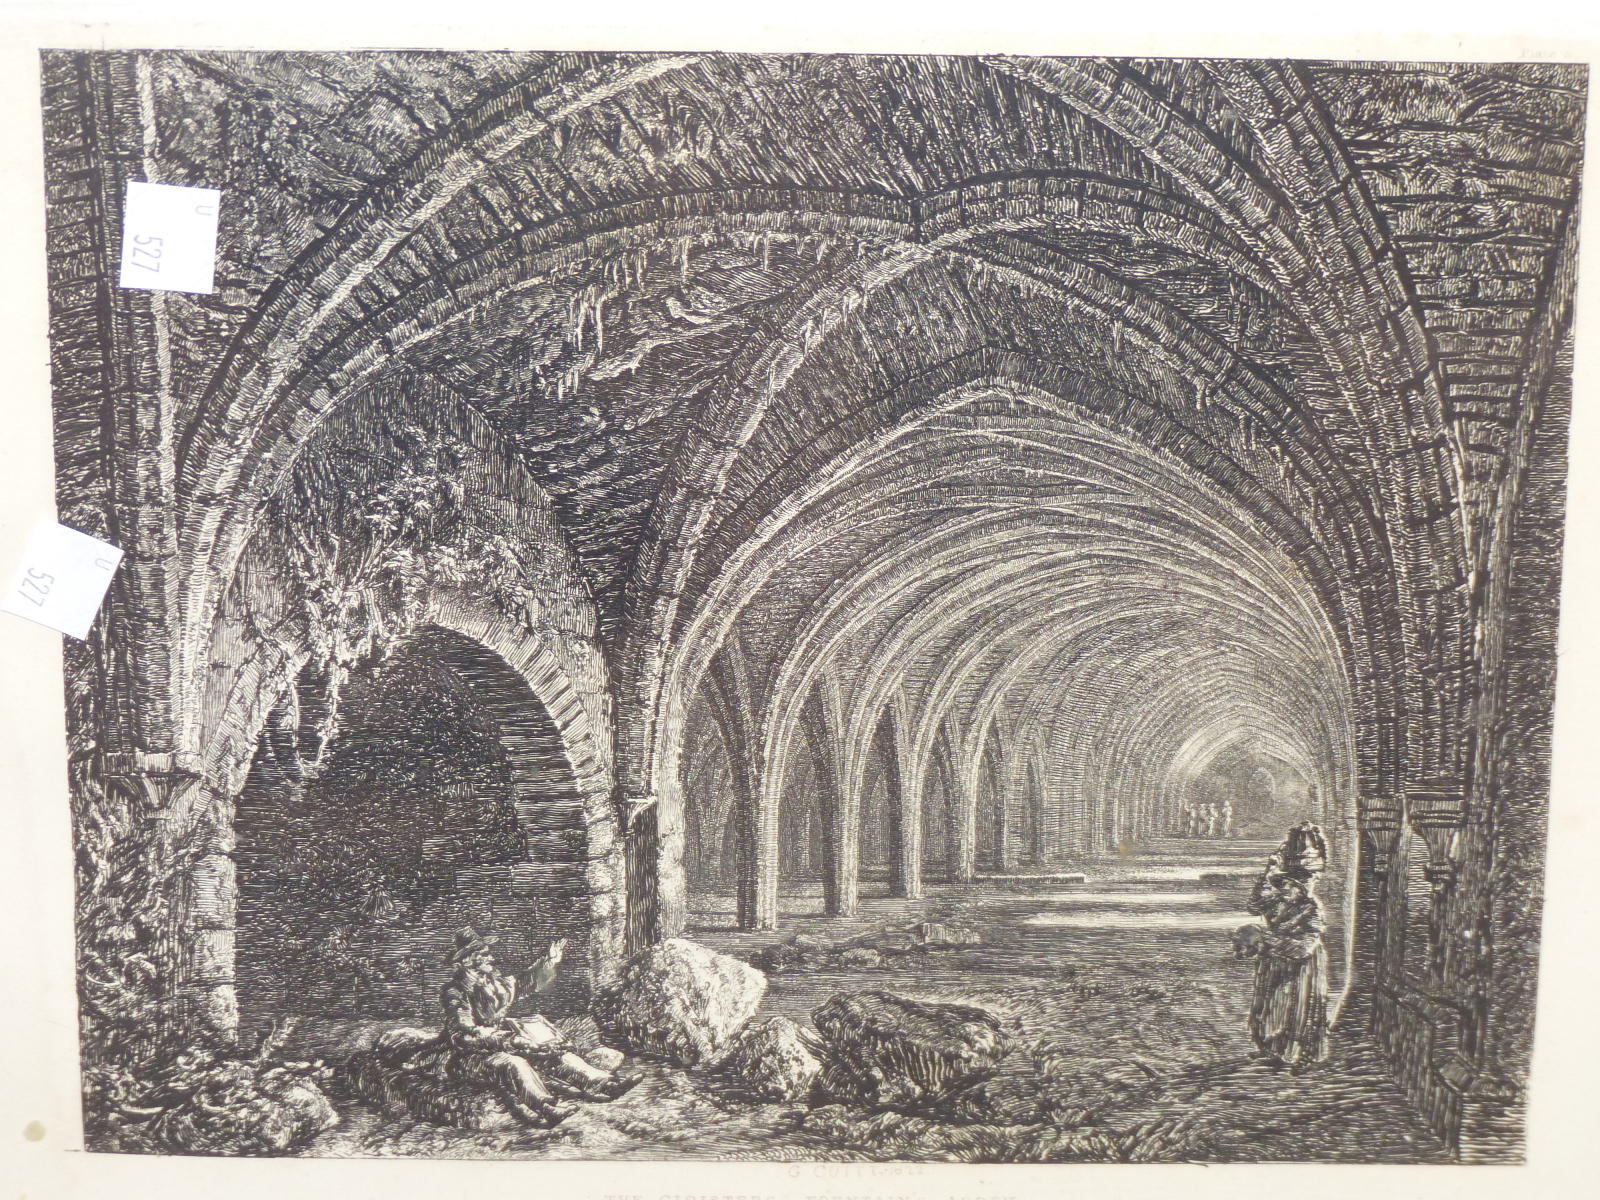 AFTER GEORGE CUITT, FOUR ENGRAVINGS OF ARCHITECTURAL VIEWS AND AN ENGRAVING AFTER PIRANESI. (5)